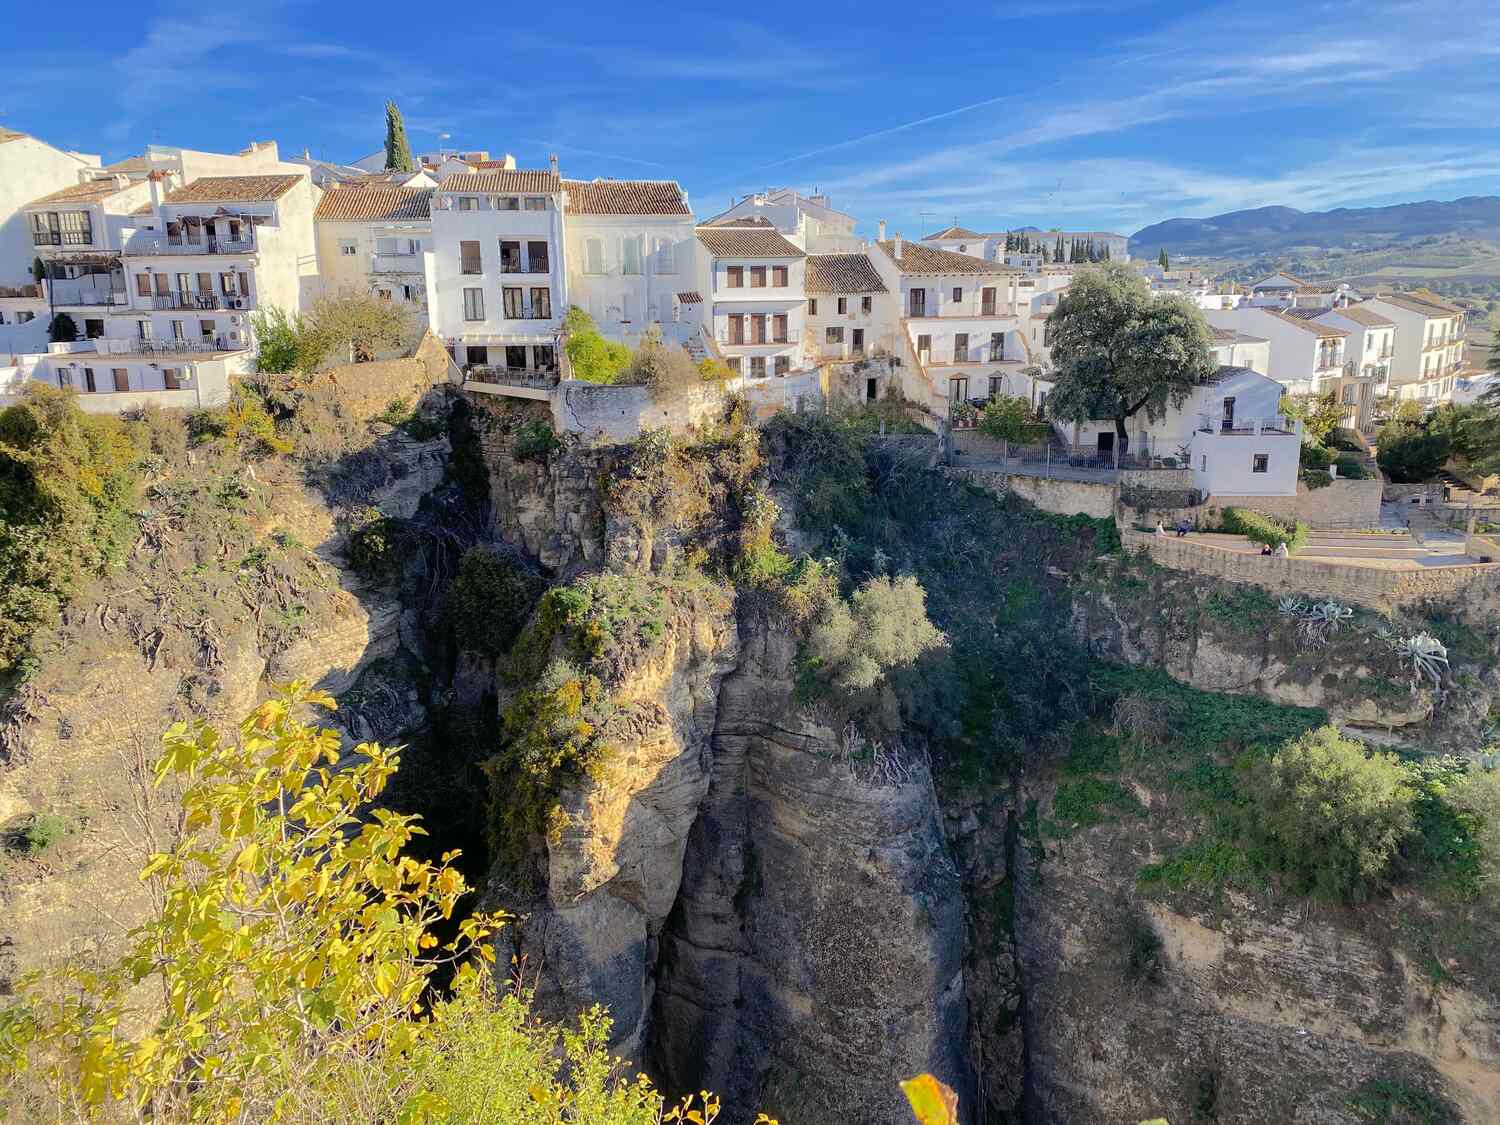 day-trip-from-seville-to-ronda, A whitewashed town perched on the edge of a steep cliff with buildings overlooking a canyon.